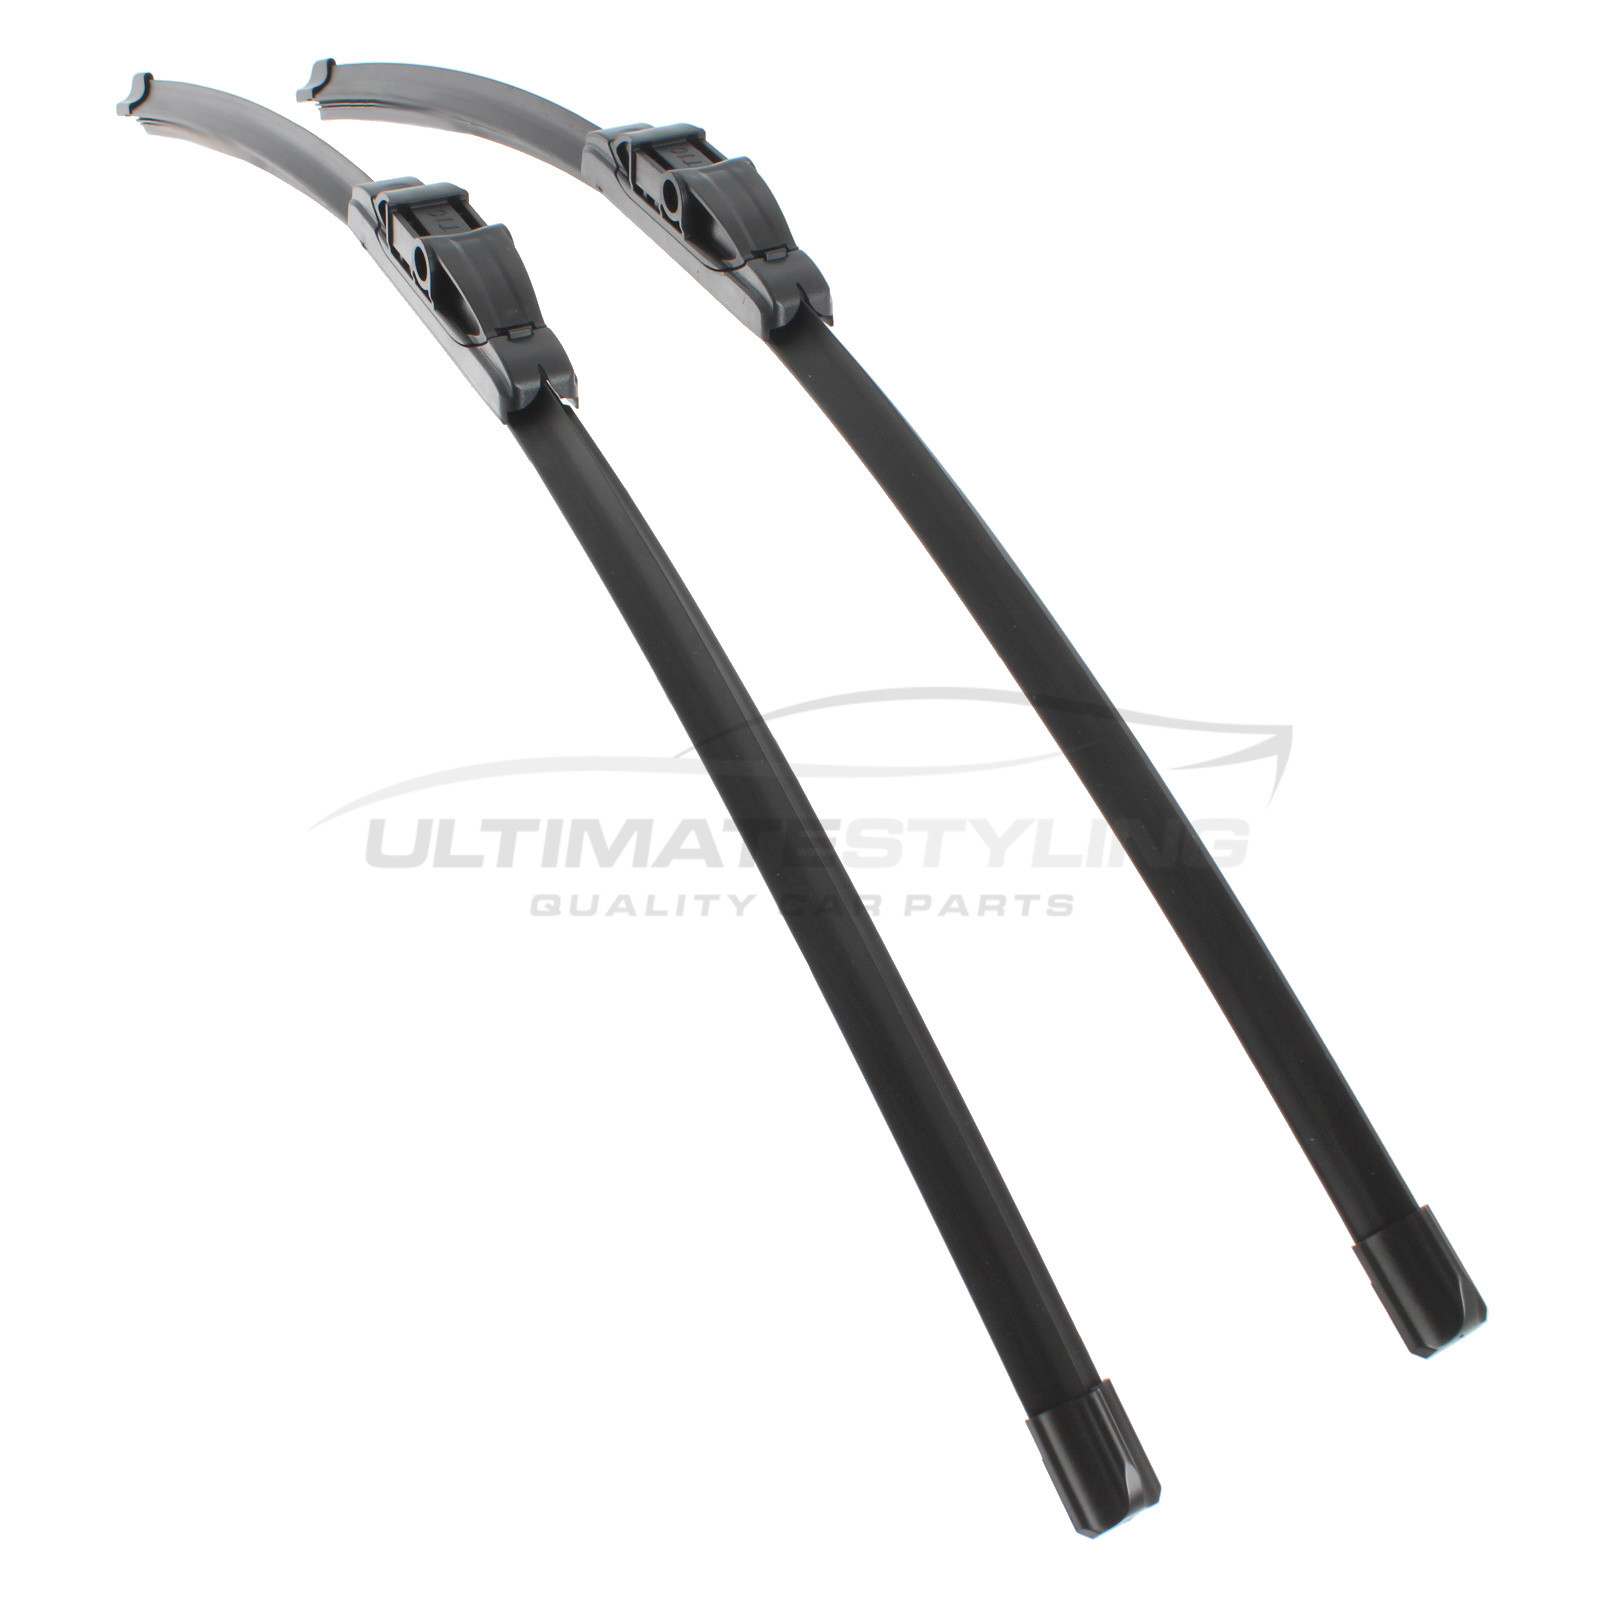 Drivers Side & Passenger Side (Front) Wiper Blades for Mercedes Benz CLS Class